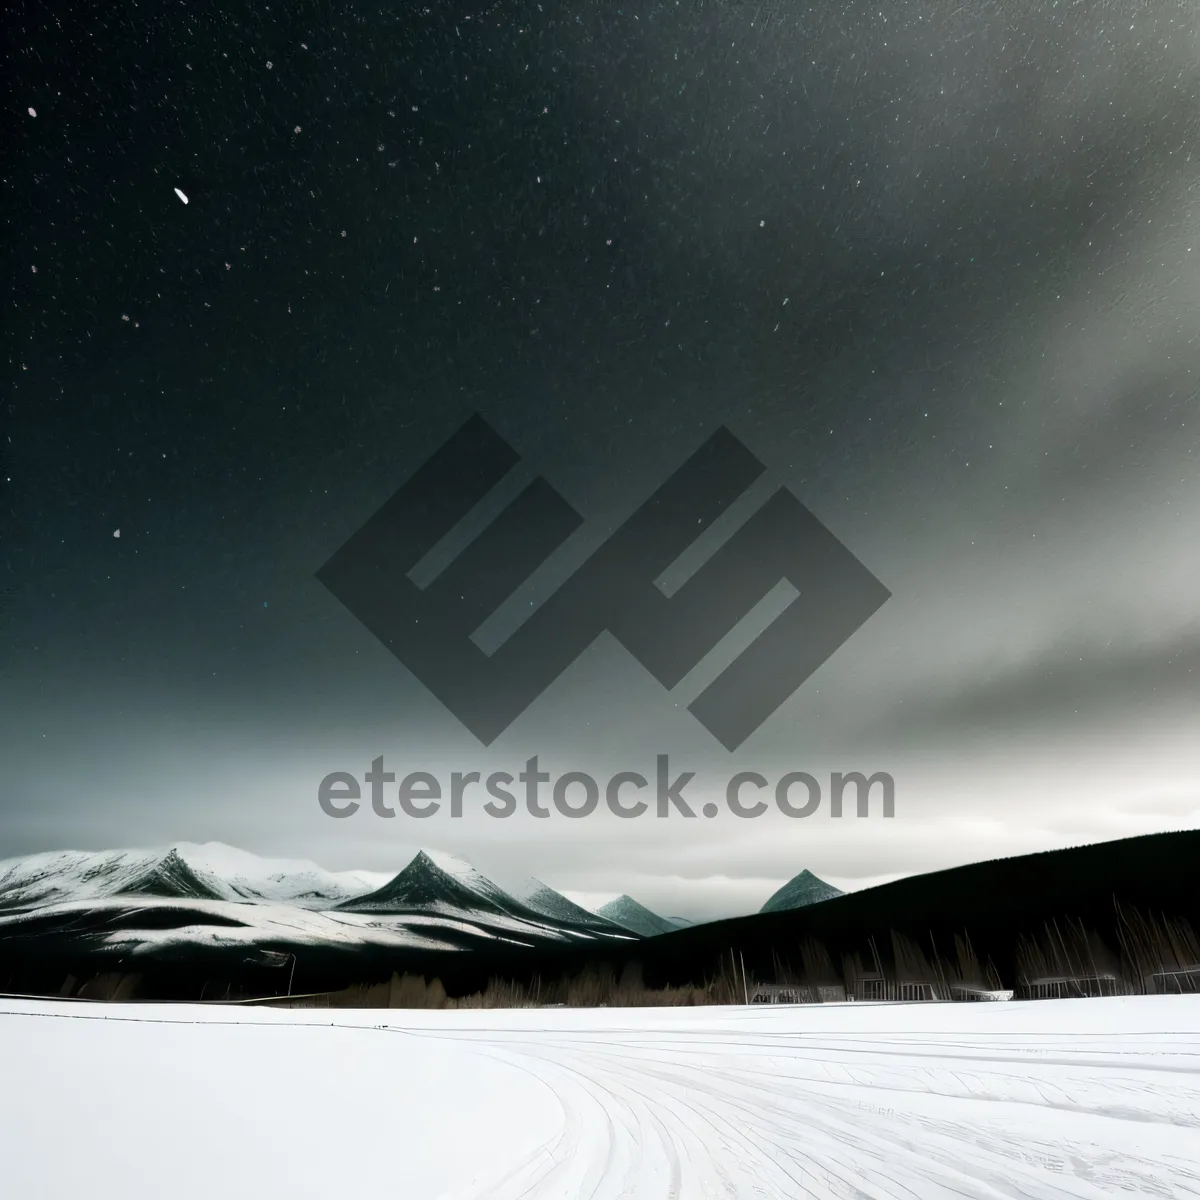 Picture of Enchanting scene of majestic mountains draped in glistening snow creates a Winter Wonderland